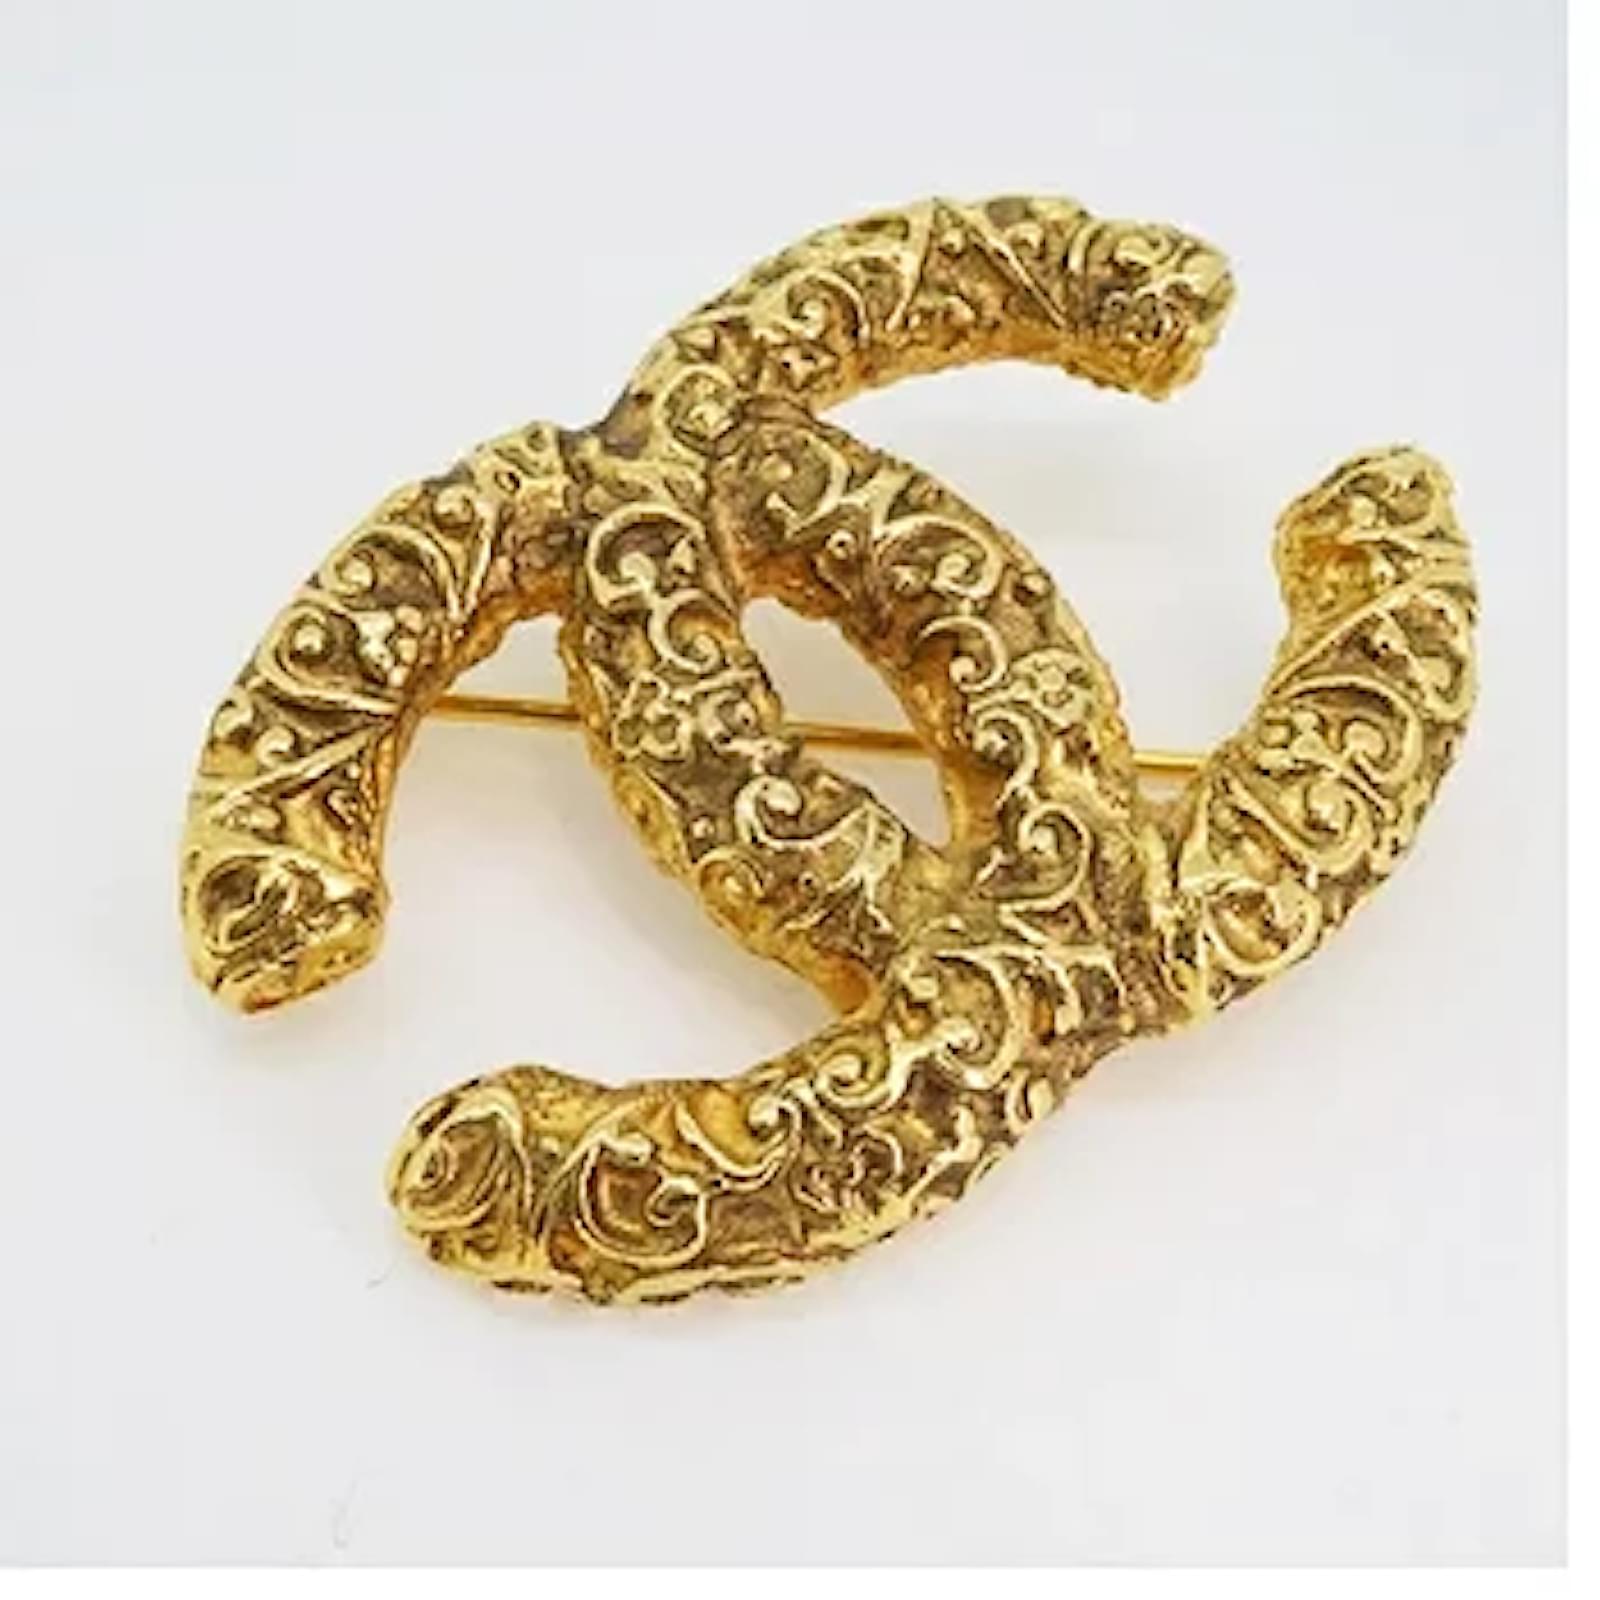 CHANEL, Jewelry, Chanel Brooch Gold Plated Used Women Cc Coco Logo